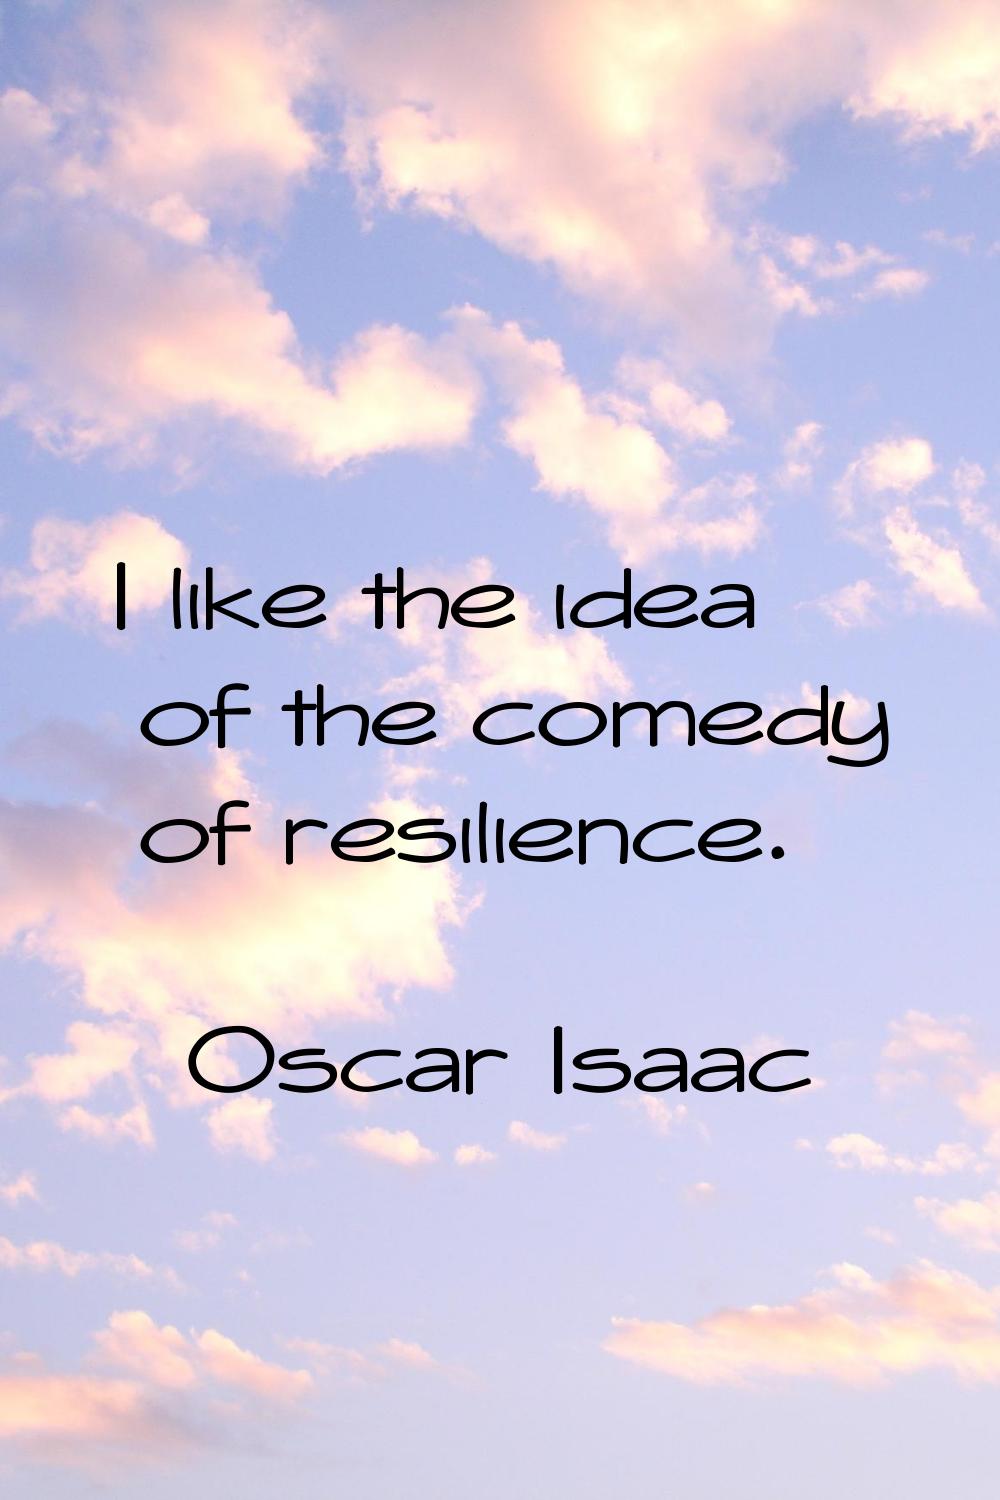 I like the idea of the comedy of resilience.